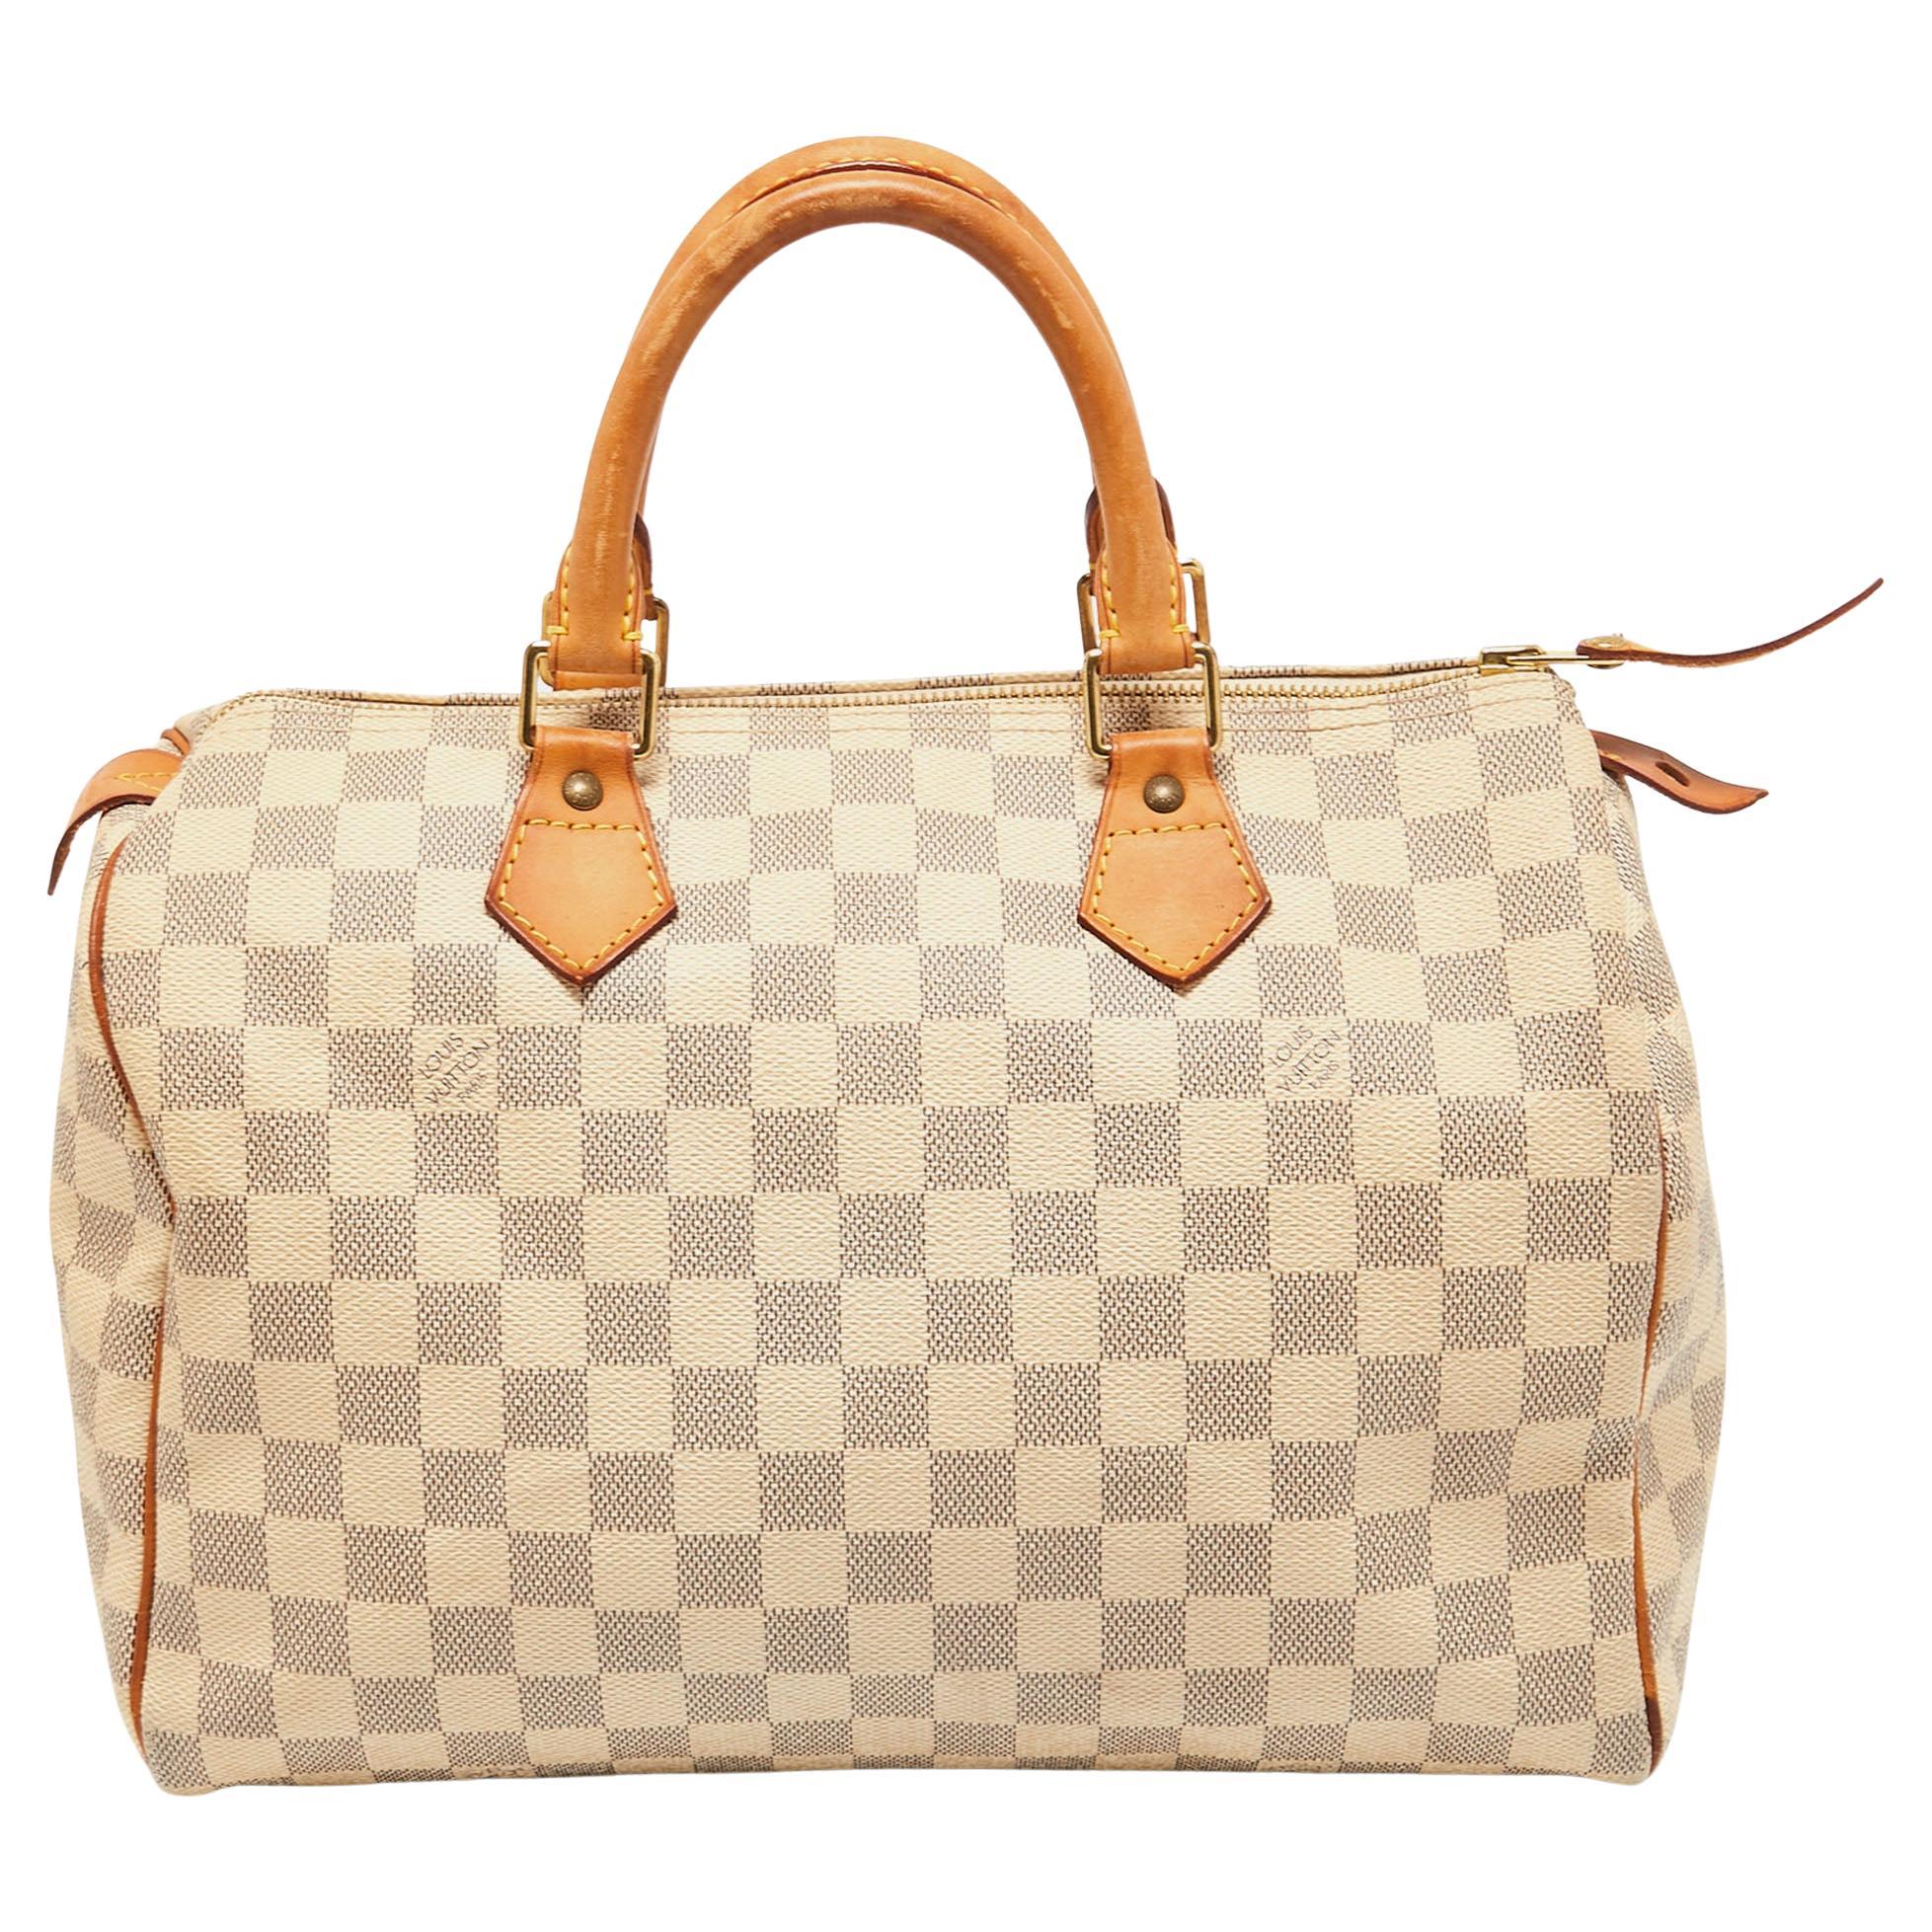 Louis Vuitton Speedy 30 Used - 18 For Sale on 1stDibs